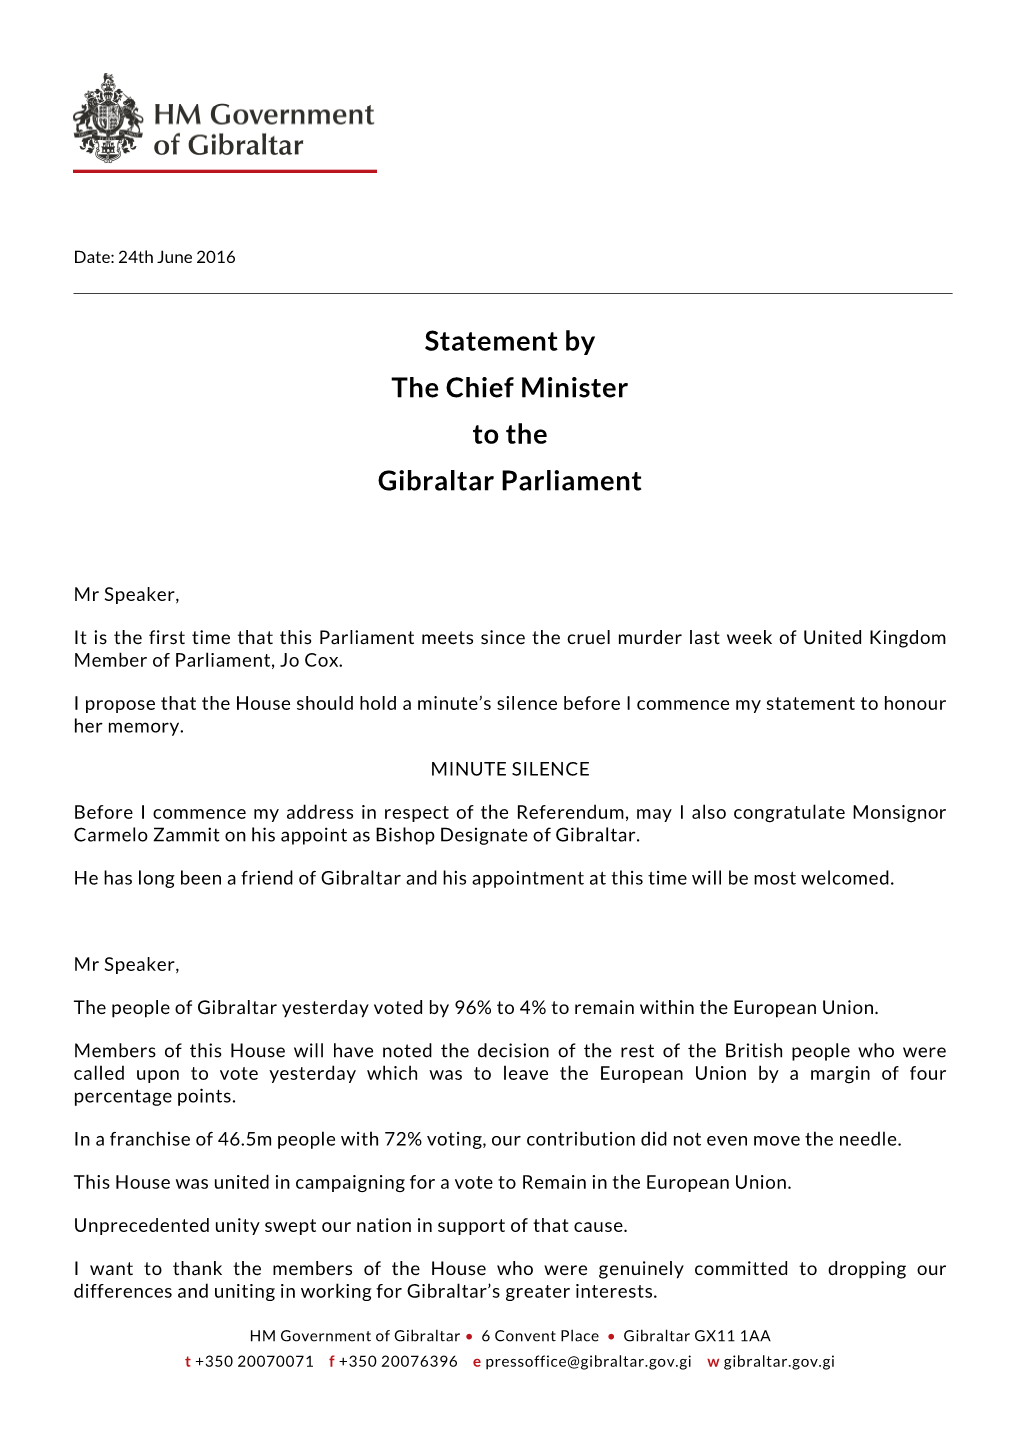 Statement by the Chief Minister to the Gibraltar Parliament